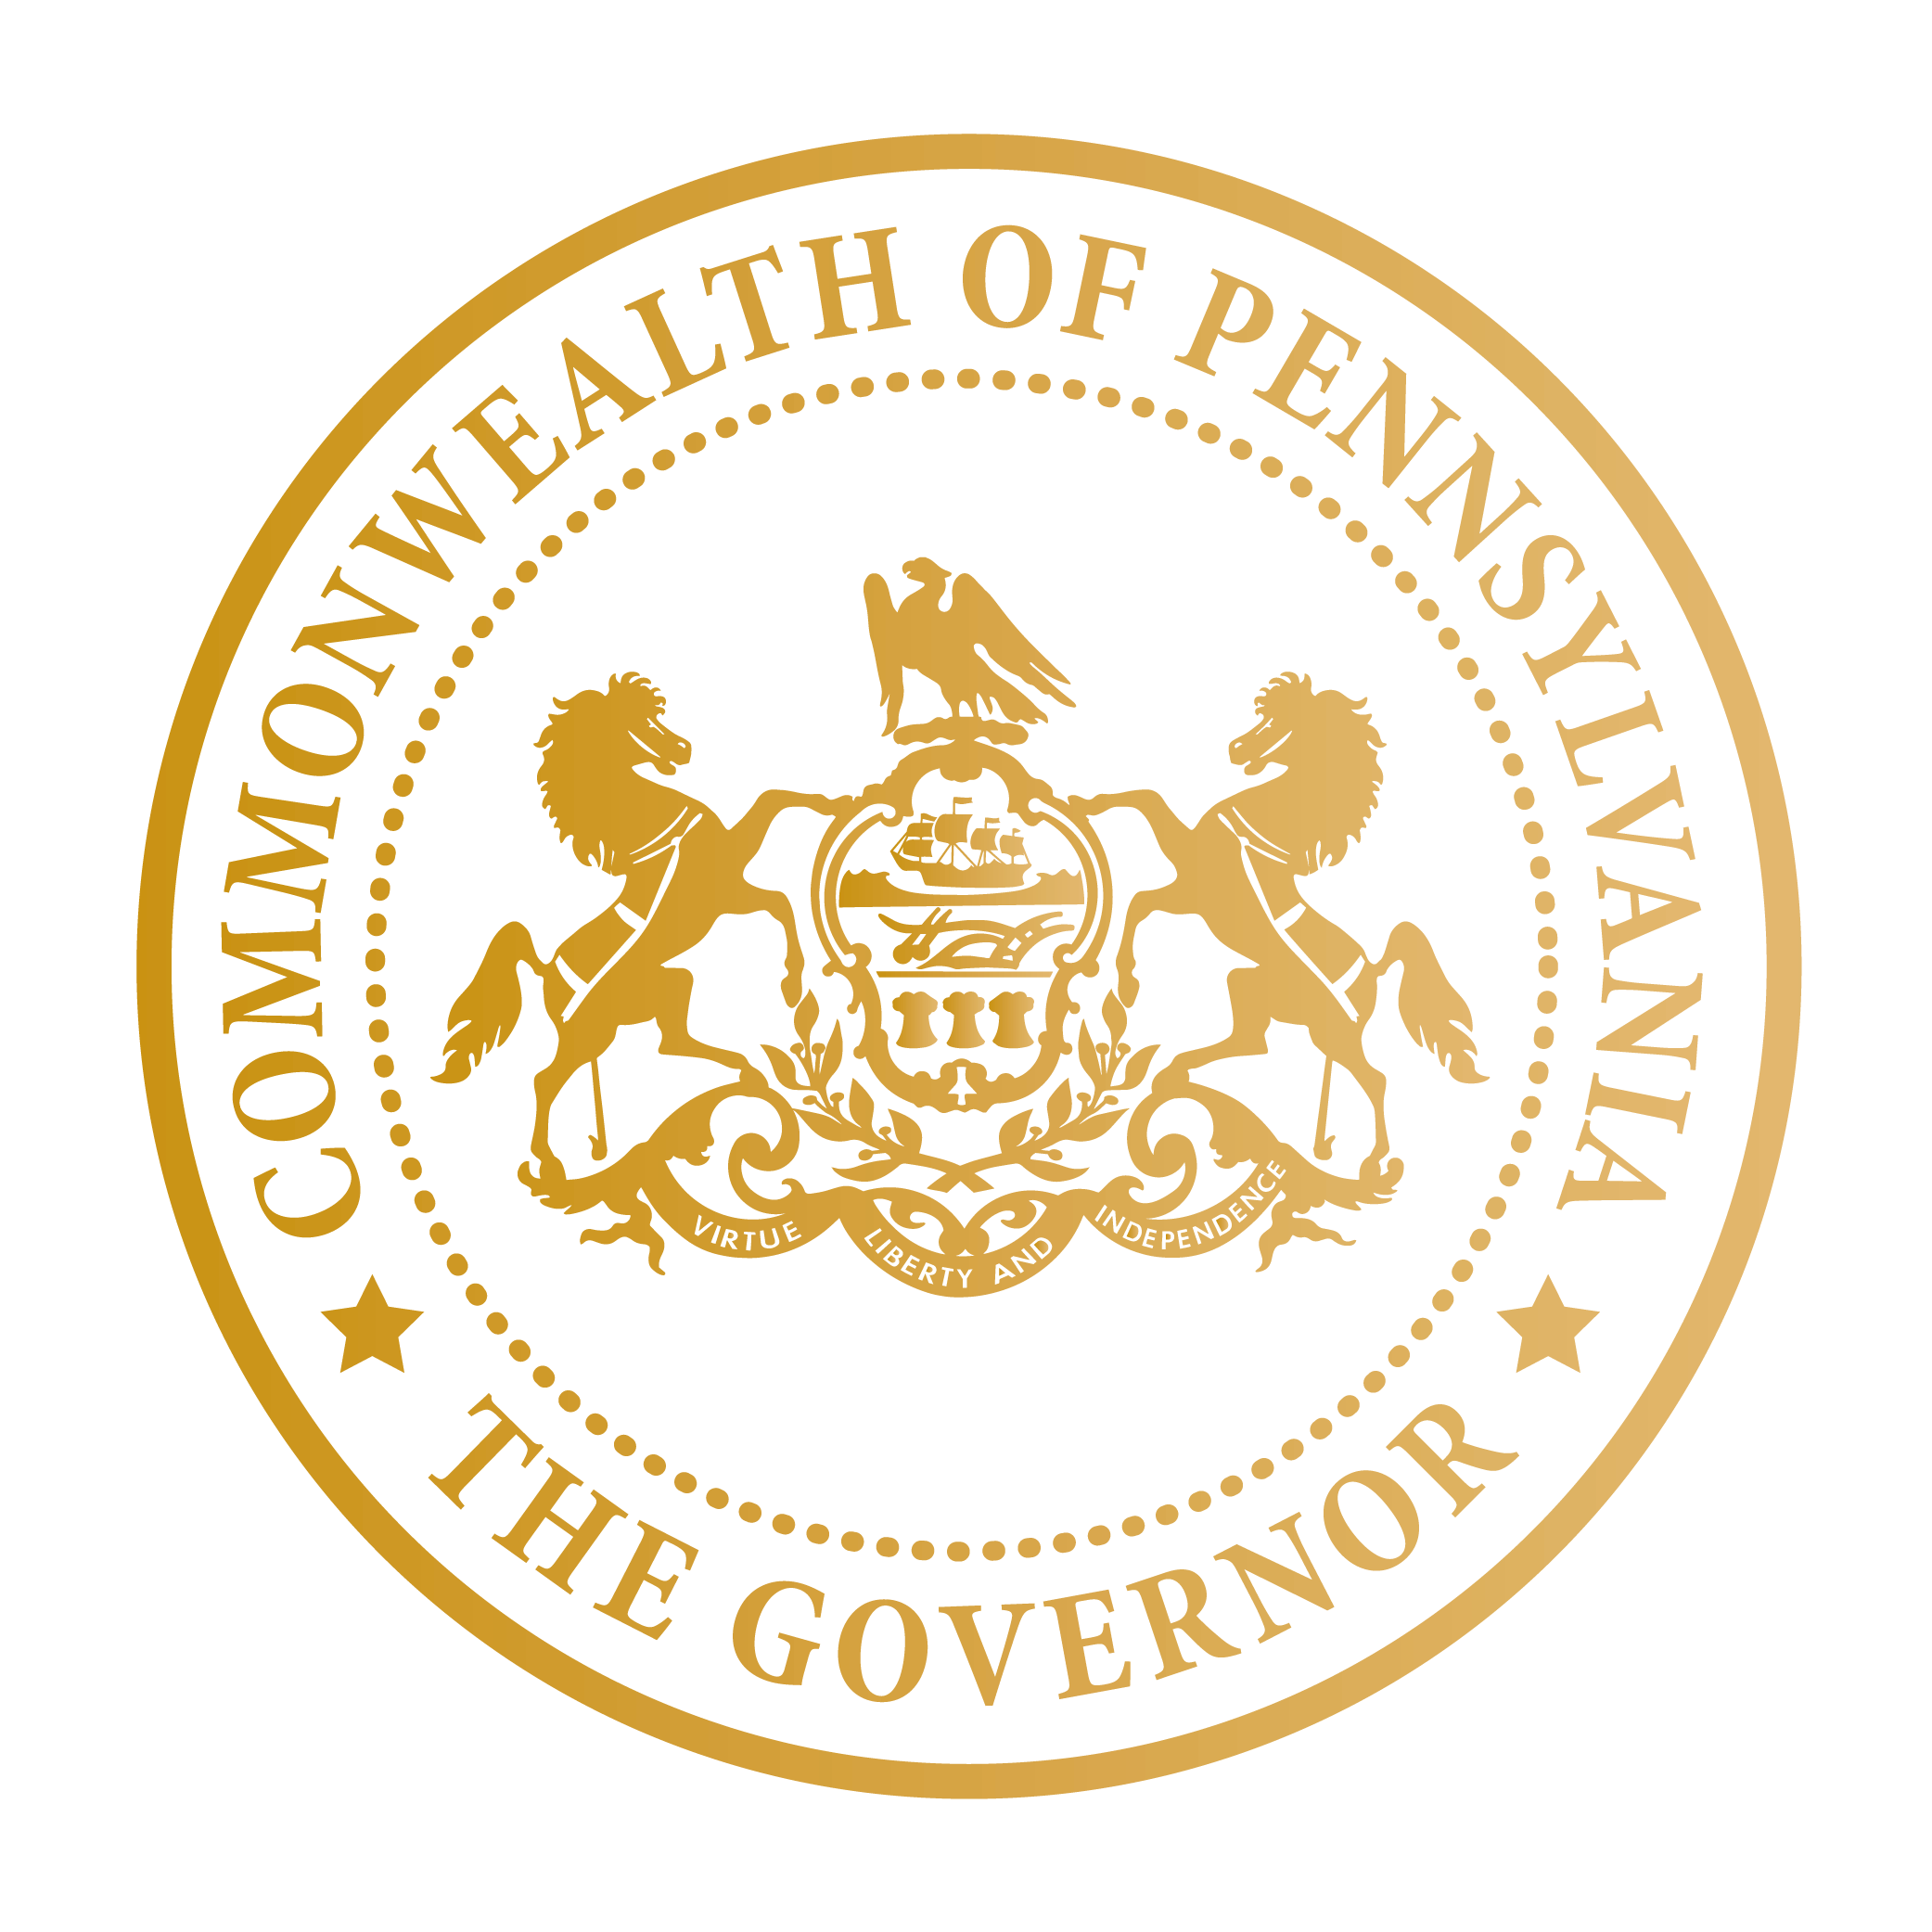 The seal of the Office of the Governor of the Commonwealth of Pennsylvania reading those words around a picture of two horses all in gold